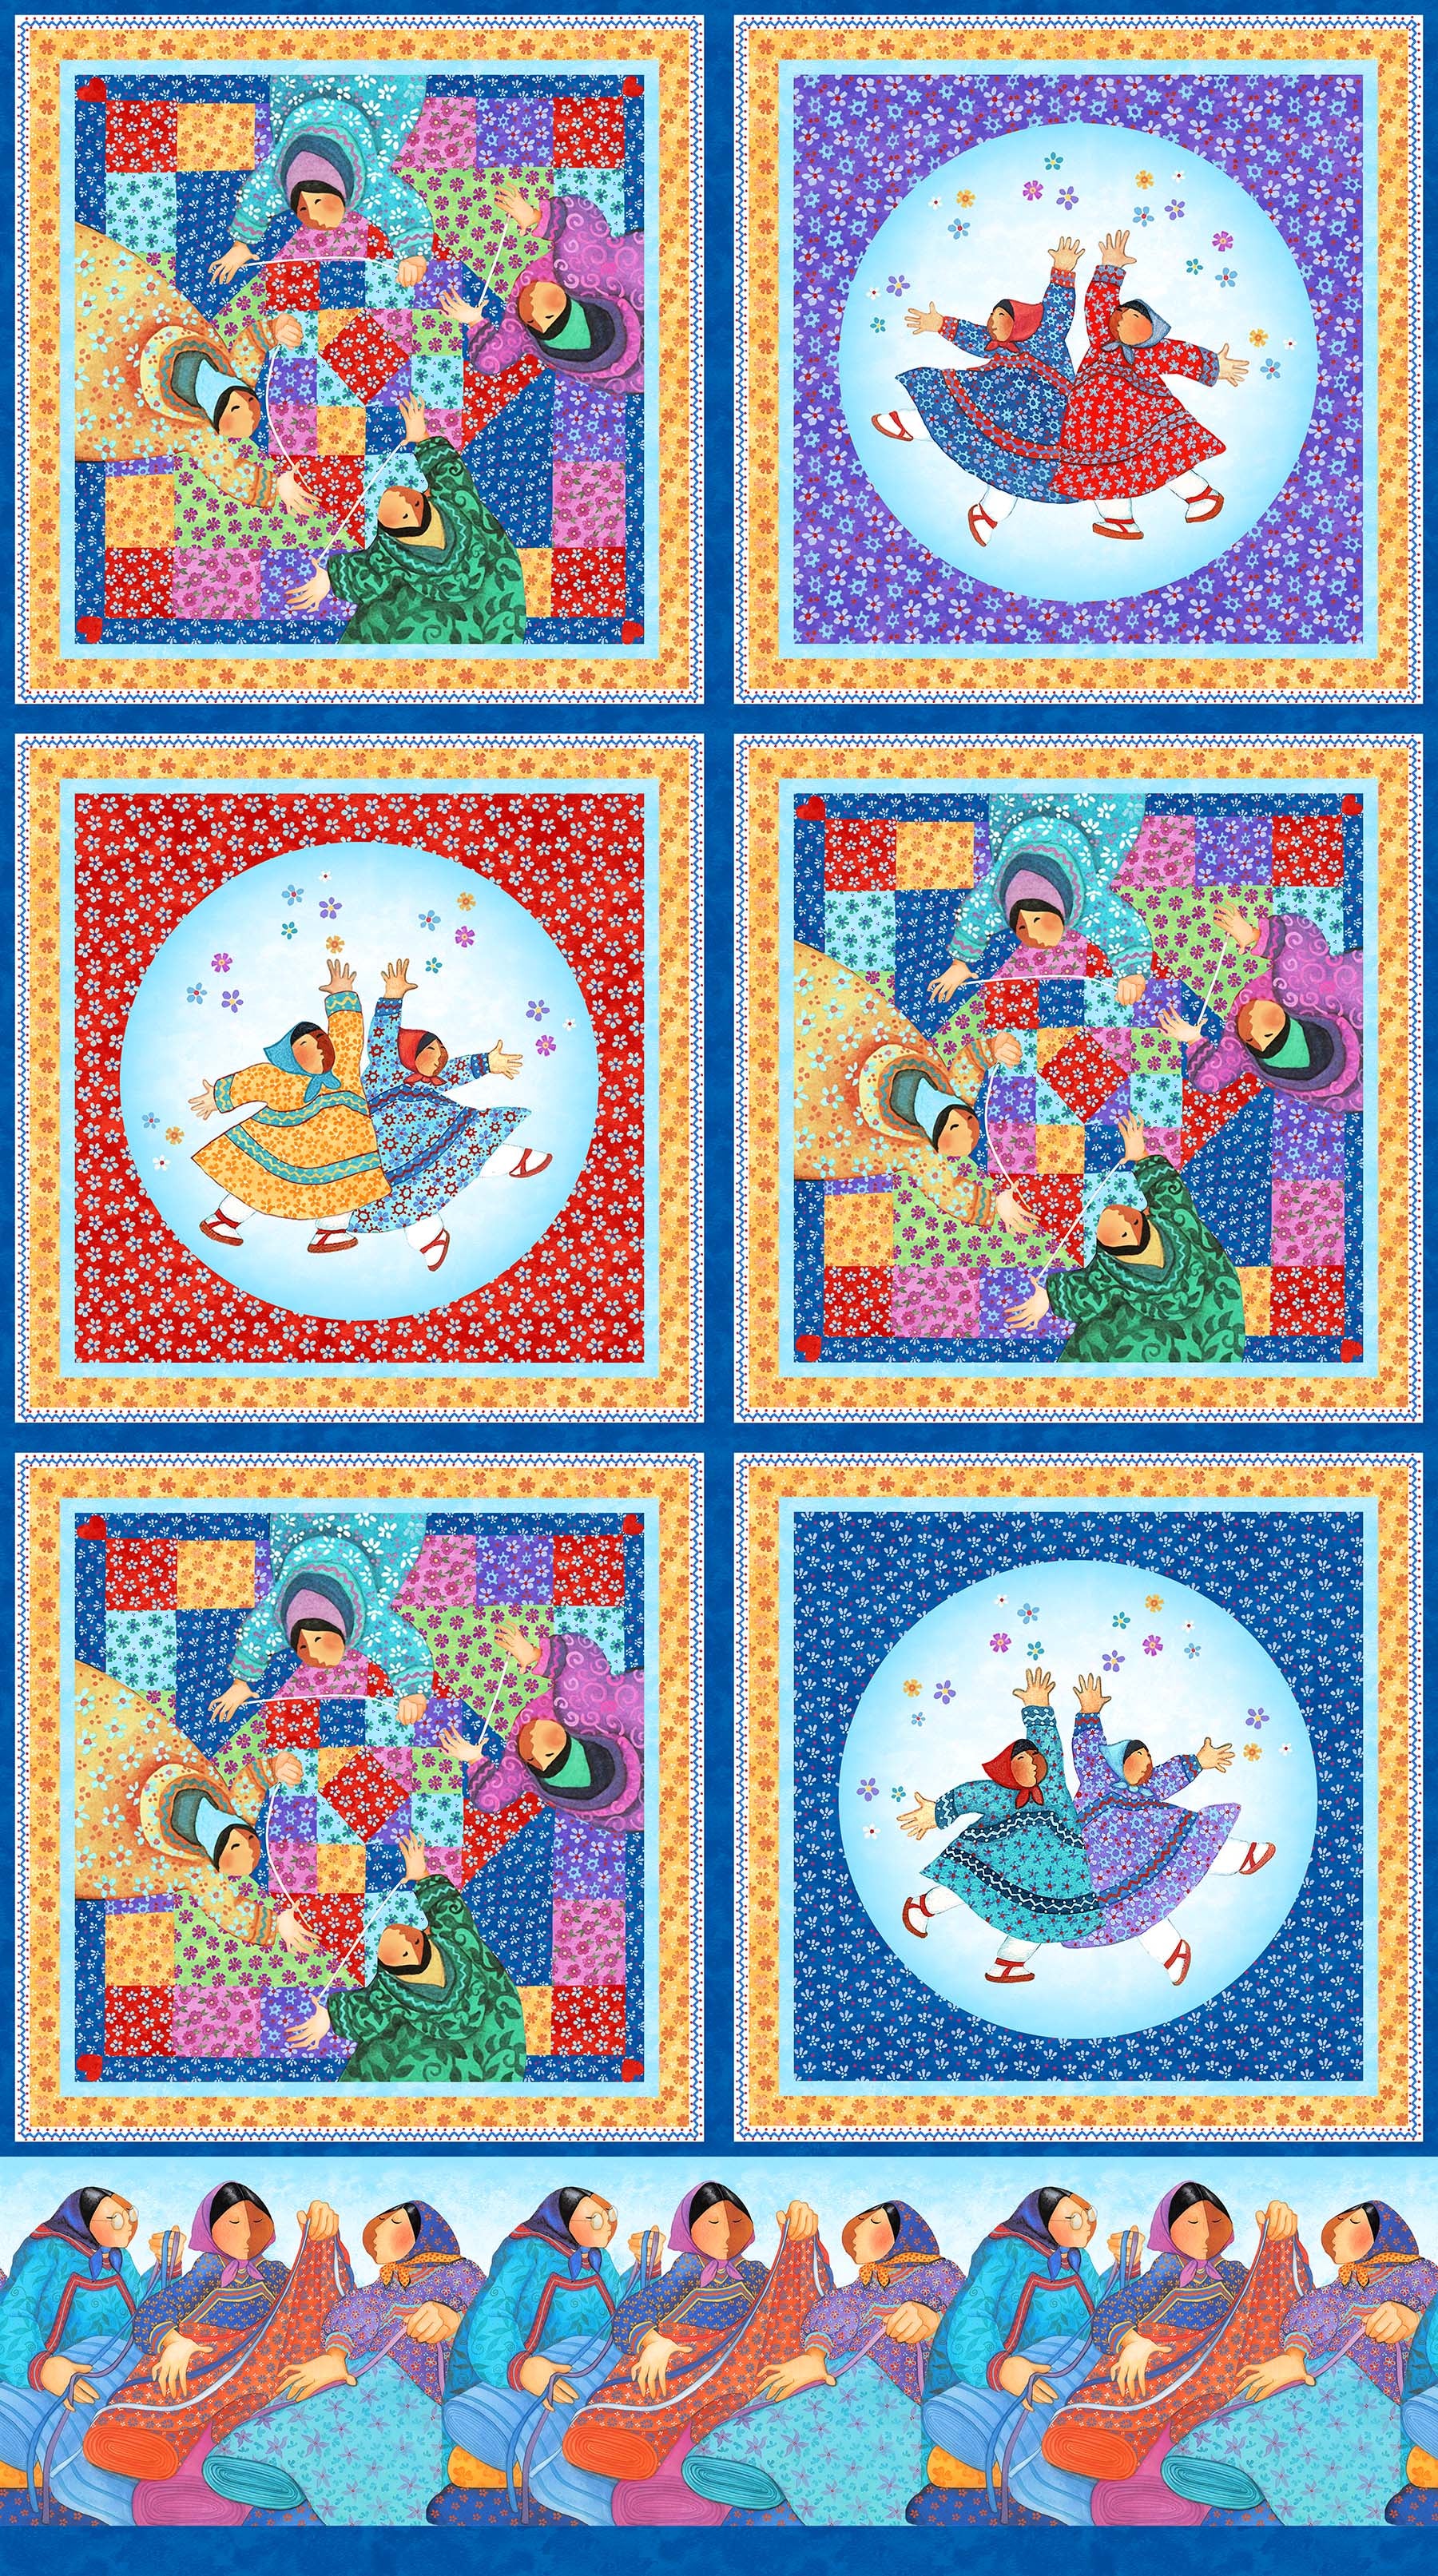 Quilts and Kuspuks Quilt Fabric - Blocks Panel in Blue/Multi - DP25202-46 - SOLD AS A 25" PANEL